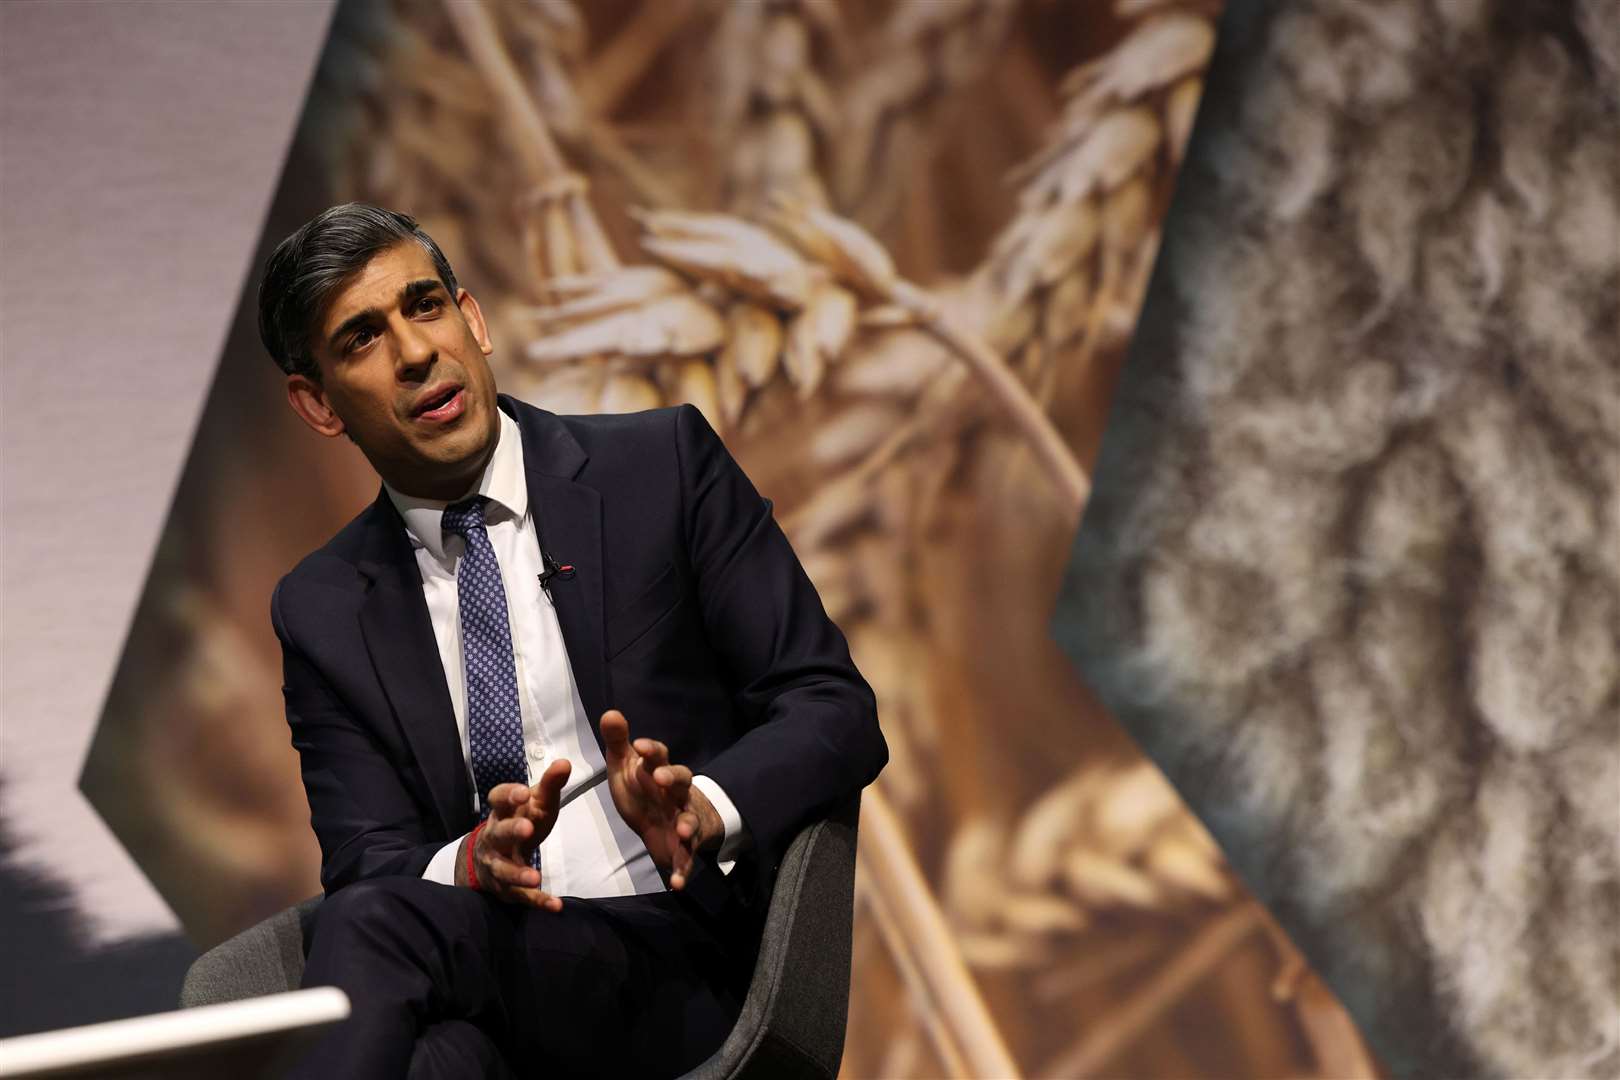 Mr Sunak was the first Prime Minister to appear before the NFU since 2008 (Adrian Dennis/PA)